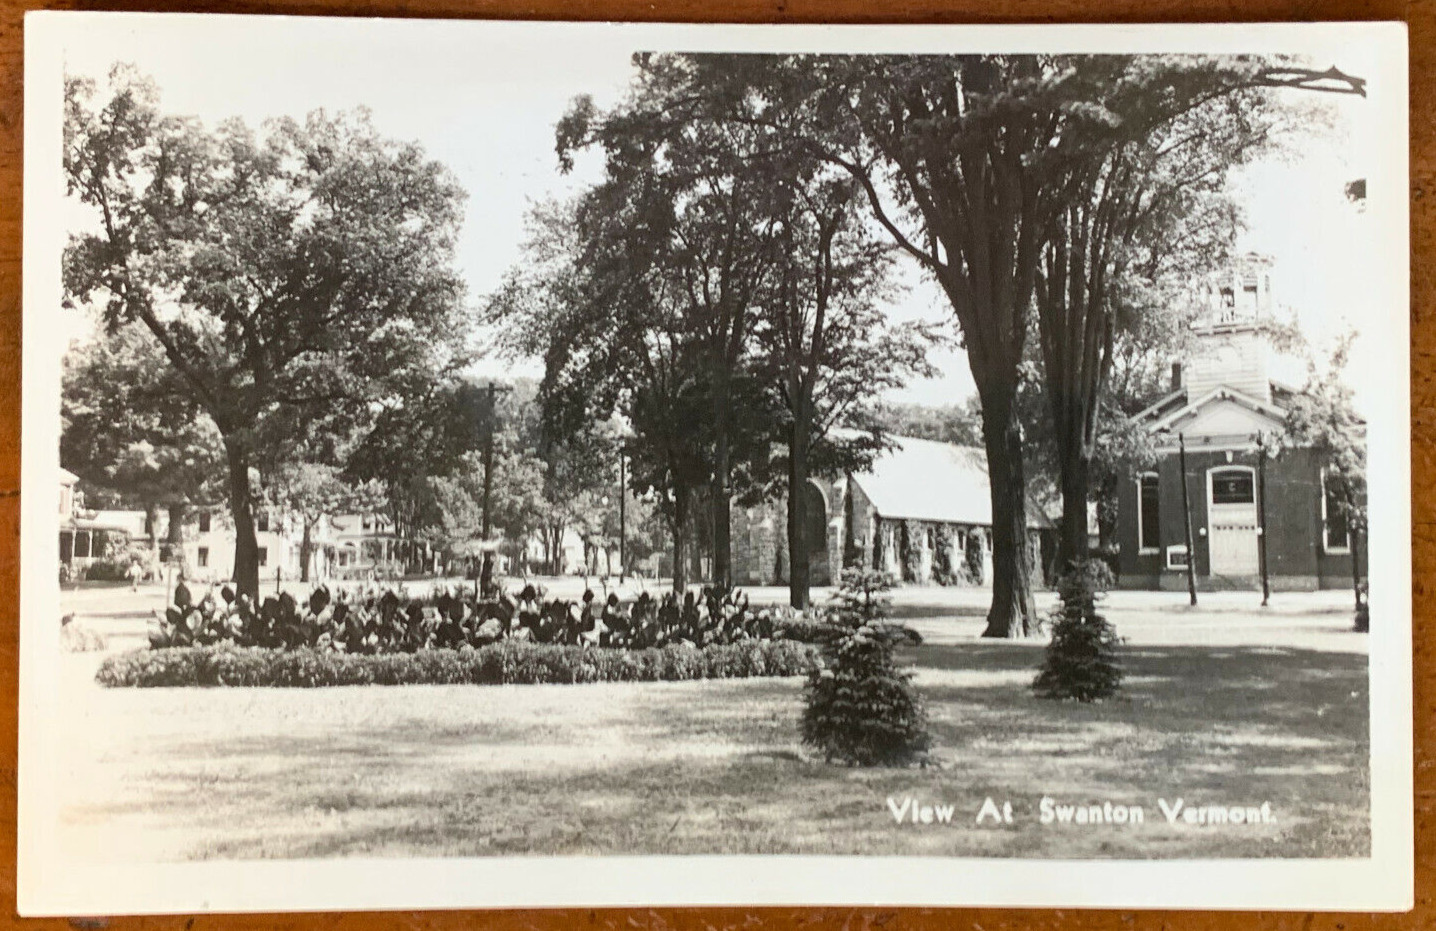 Vermont, VT, RPPC, Swanton, View of Church across Flower Bed, 1950 Blank Back PC